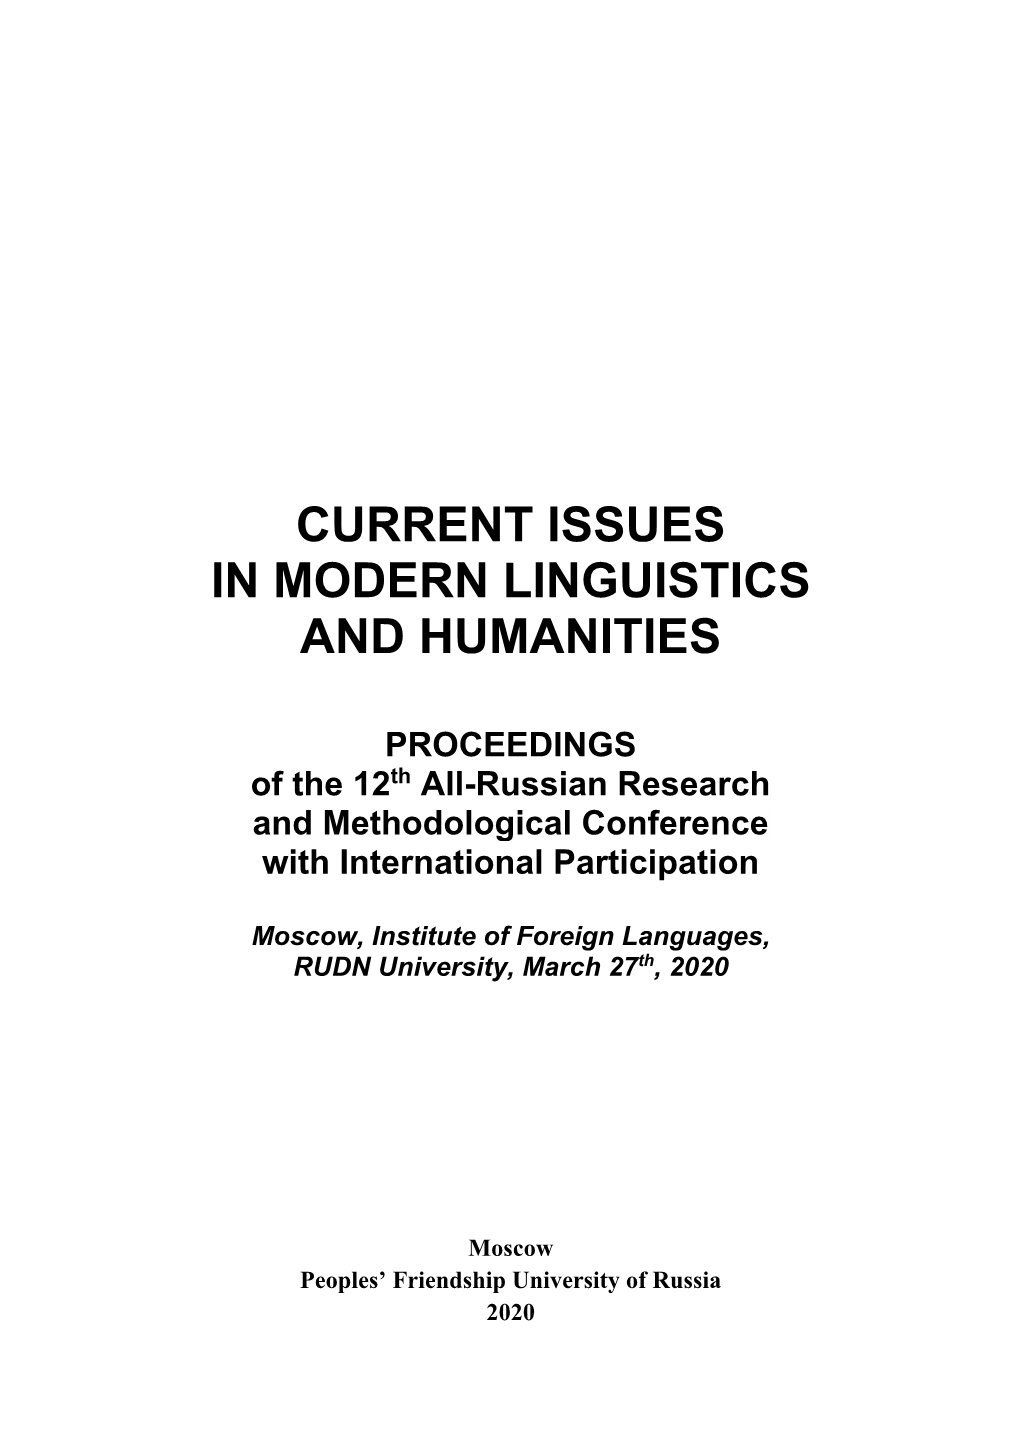 Current Issues in Modern Linguistics and Humanities